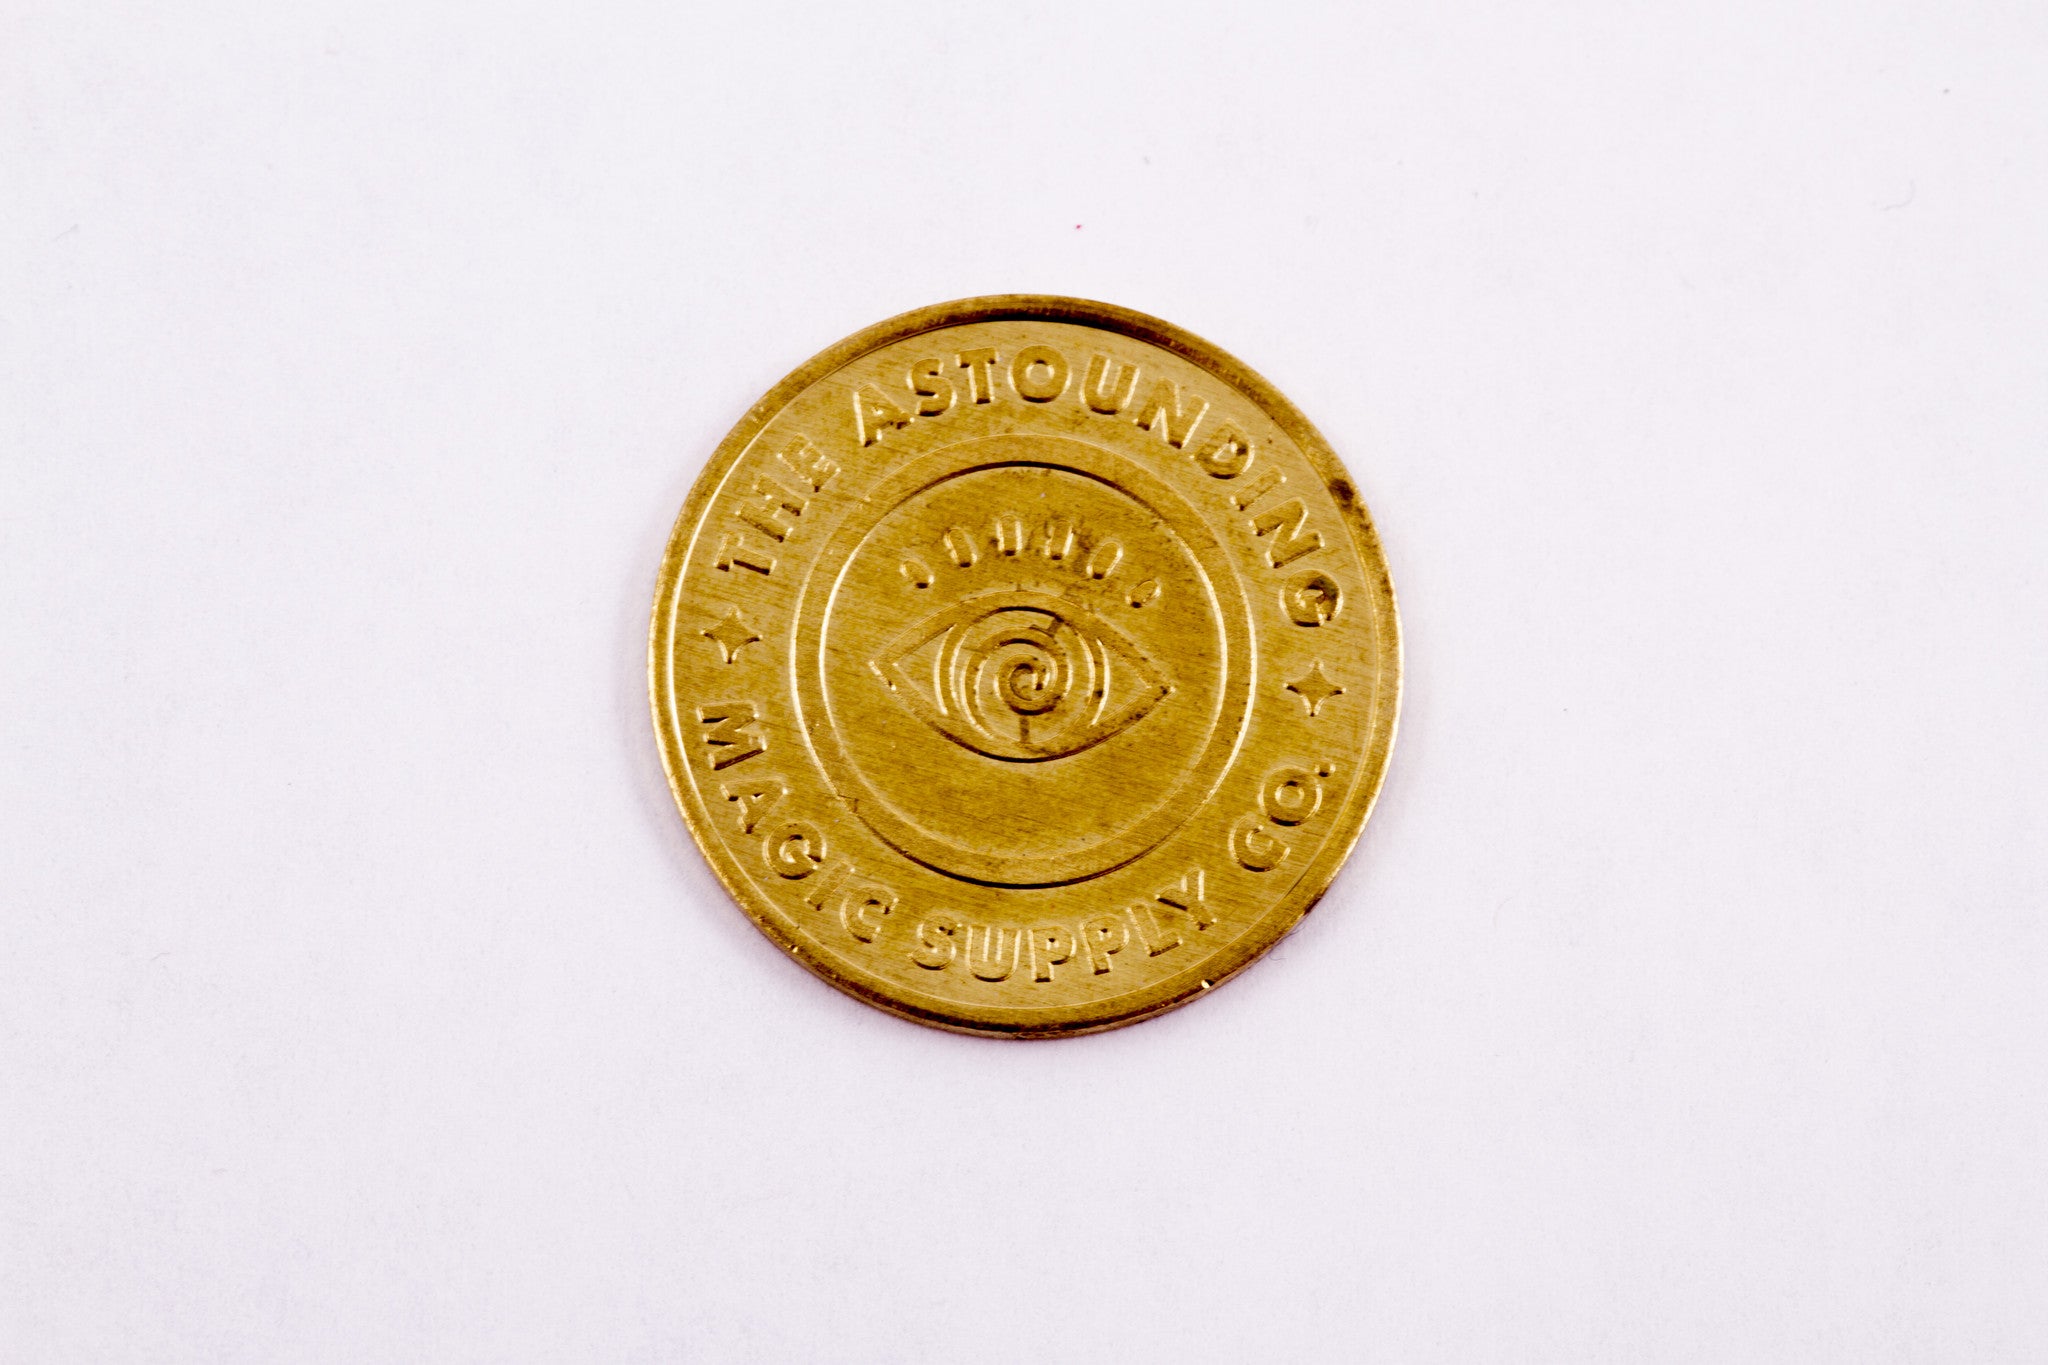 Quarter-sized gold coin. Eye on one side. Cross wands on the other side. Tivoli's logo on both sides.